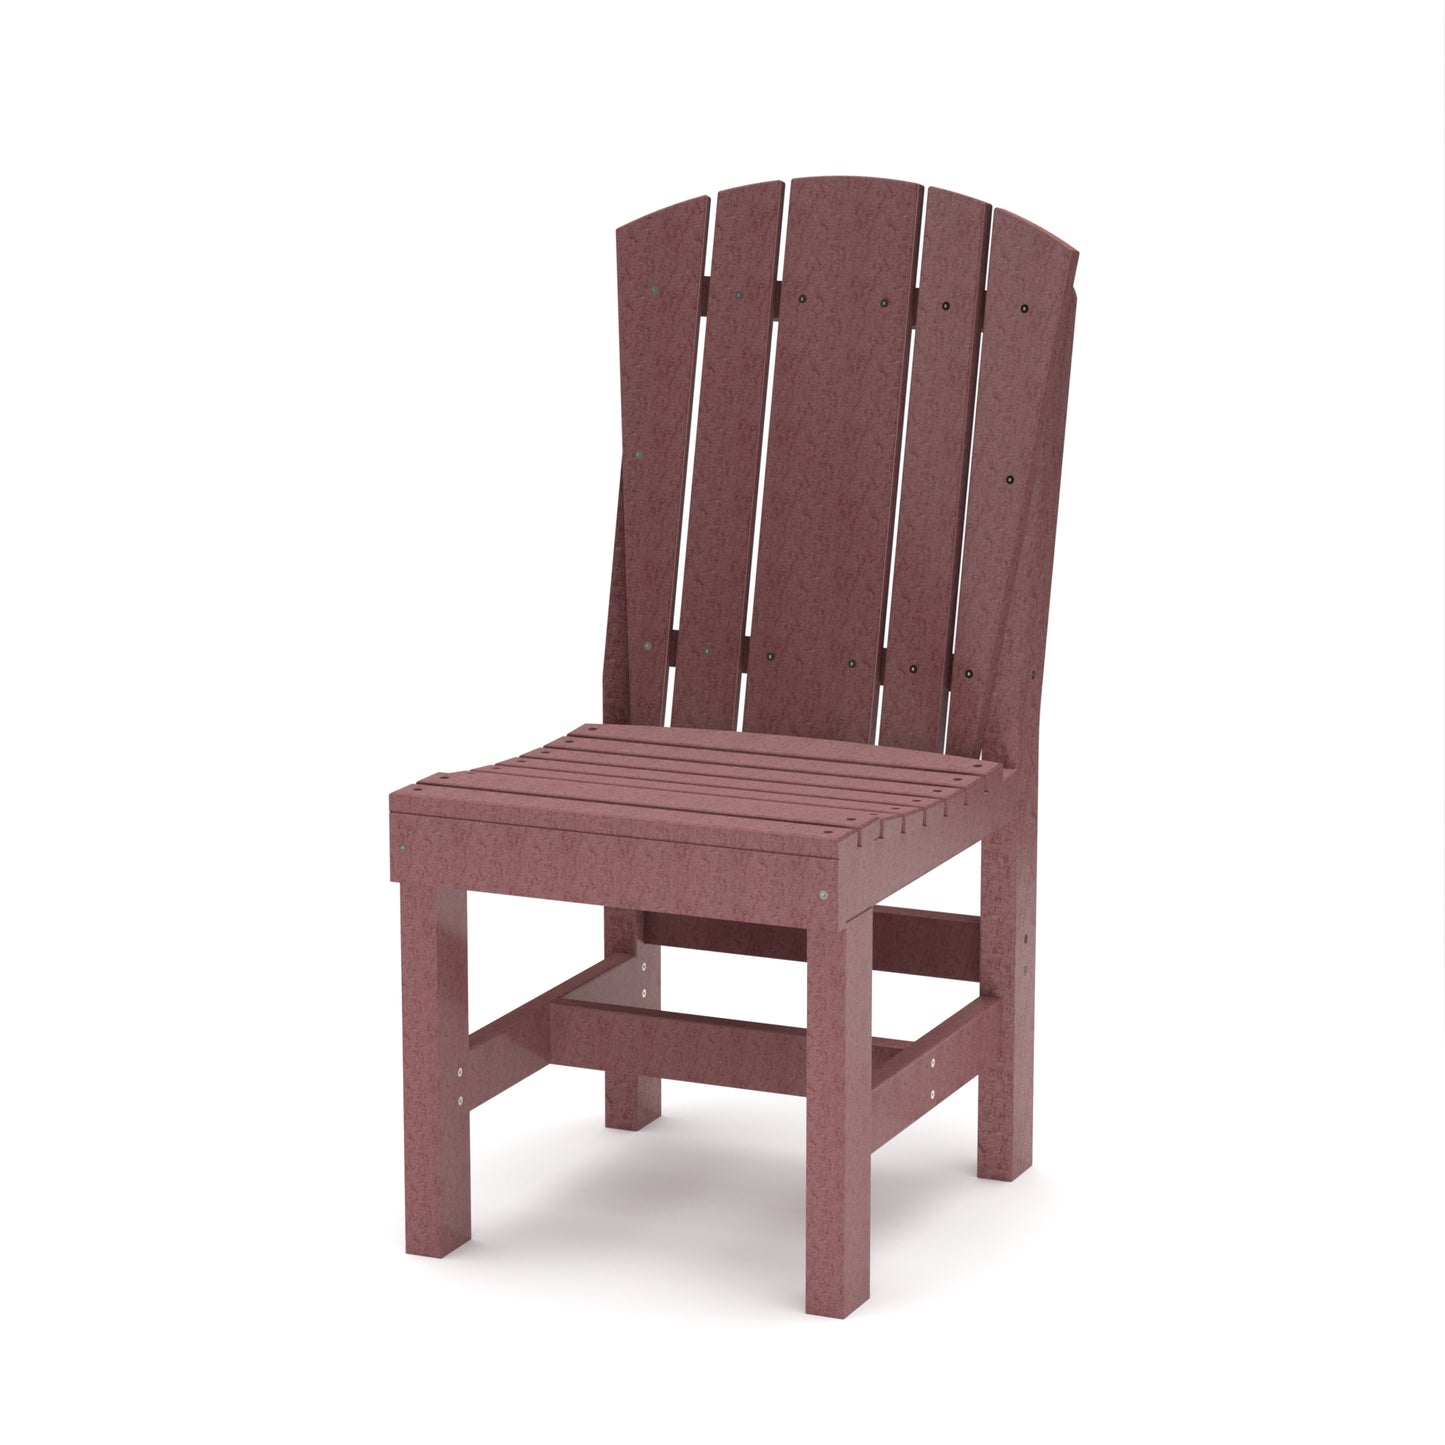 Wildridge Recycled Plastic Heritage Outdoor Dining Chair - LEAD TIME TO SHIP 6 WEEKS OR LESS